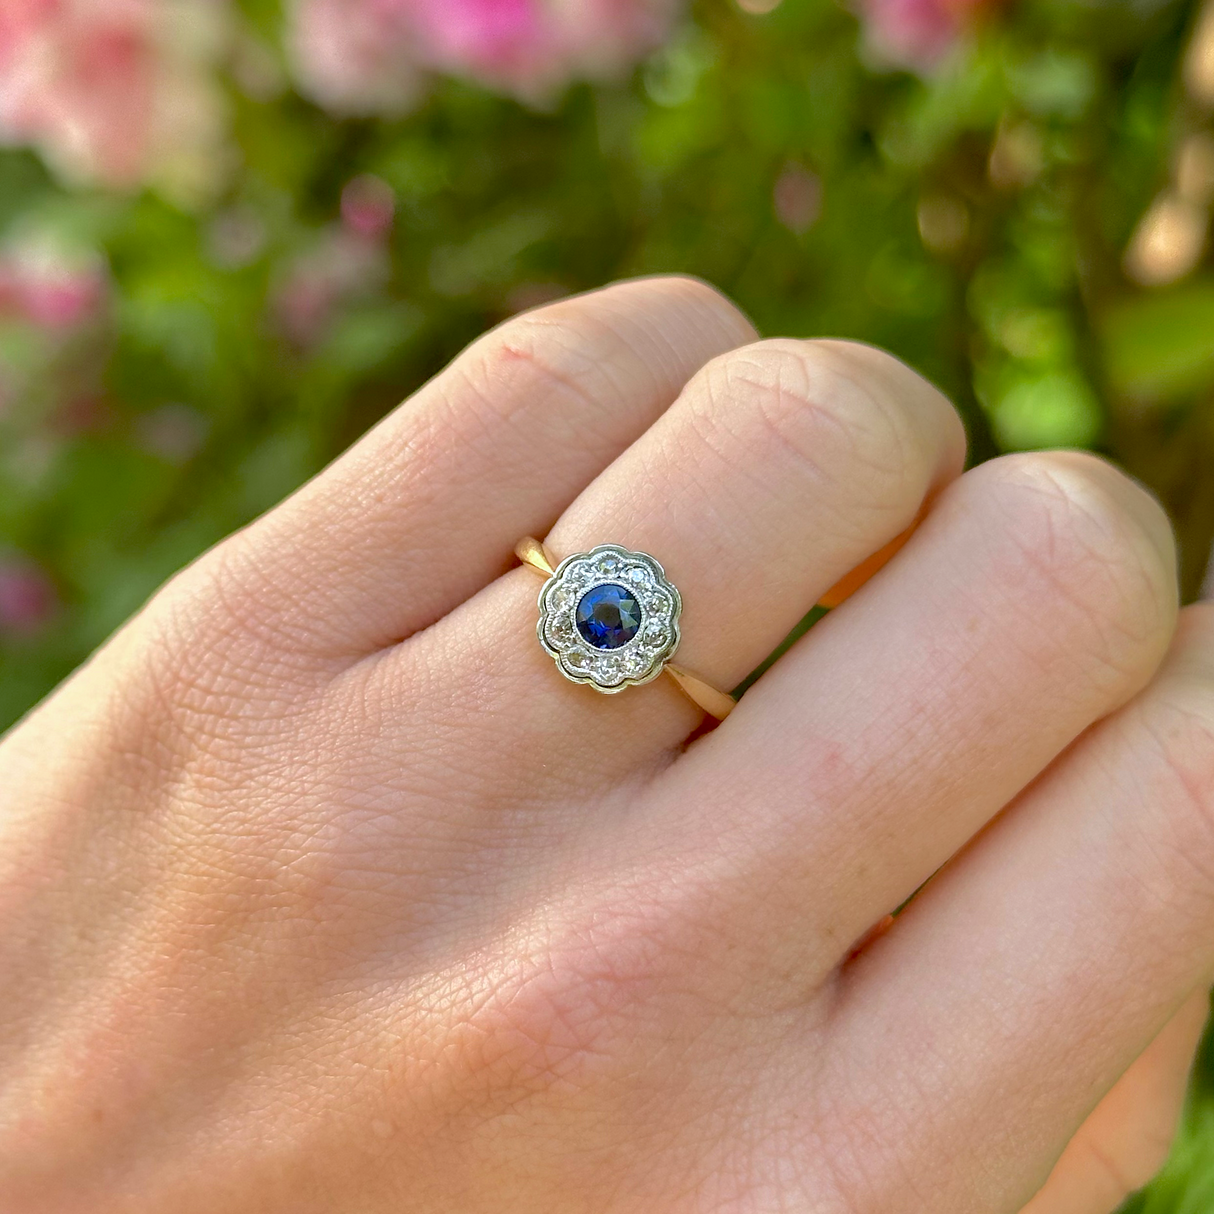 Antique, Edwardian Sapphire and Diamond Cluster Ring, 18ct Yellow Gold and Platinum worn on hand.